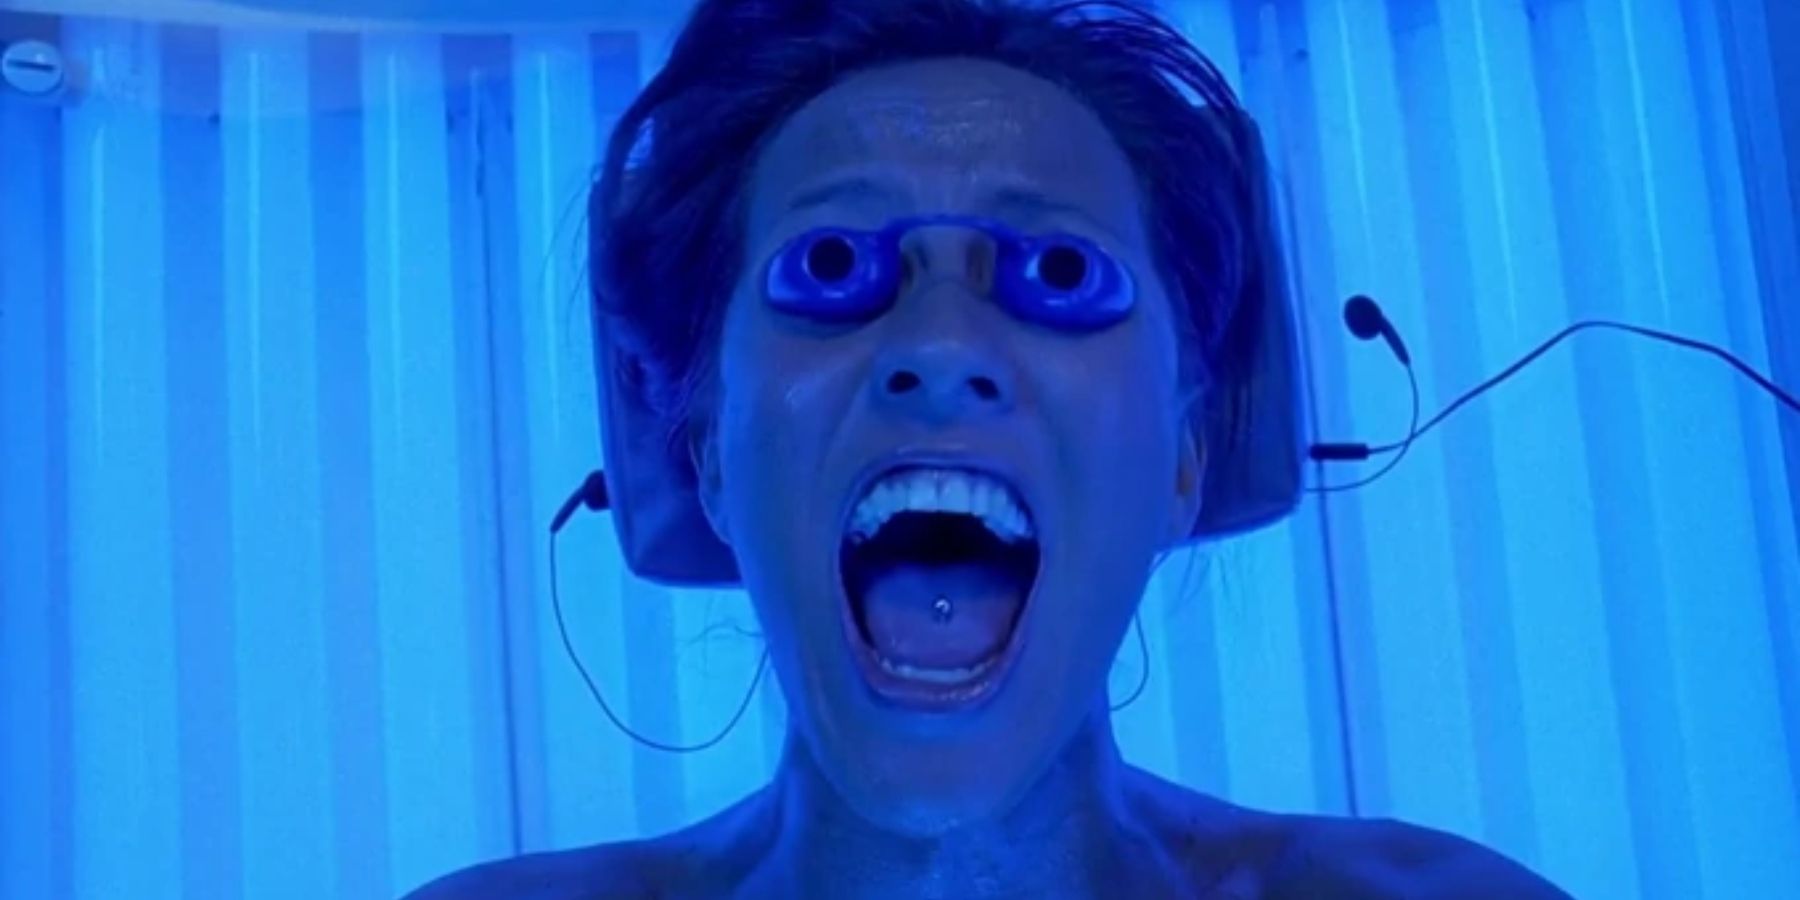 Ashlyn screaming during her tanning bed death scene in Final Destination 3